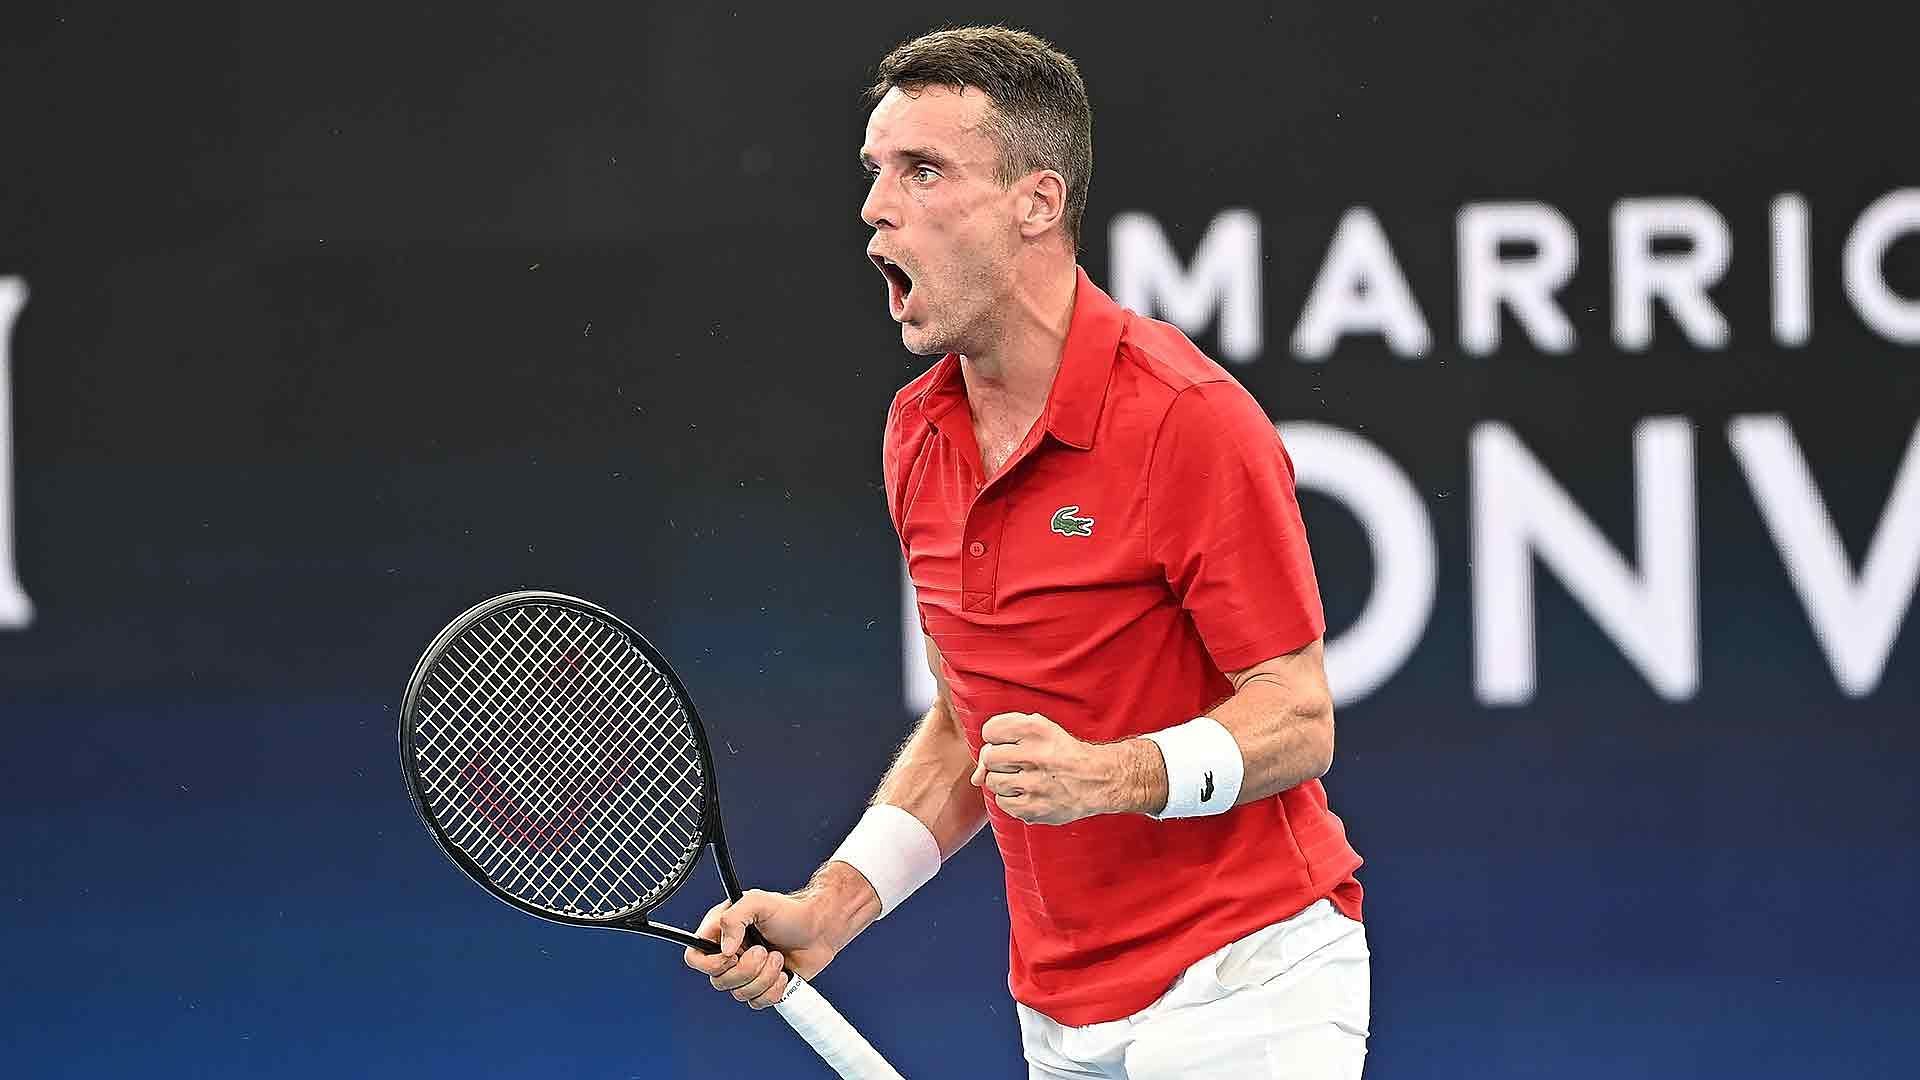 Roberto Bautista Agut dictated a lot of the rallies against Daniil Medvedev with his angular forehand